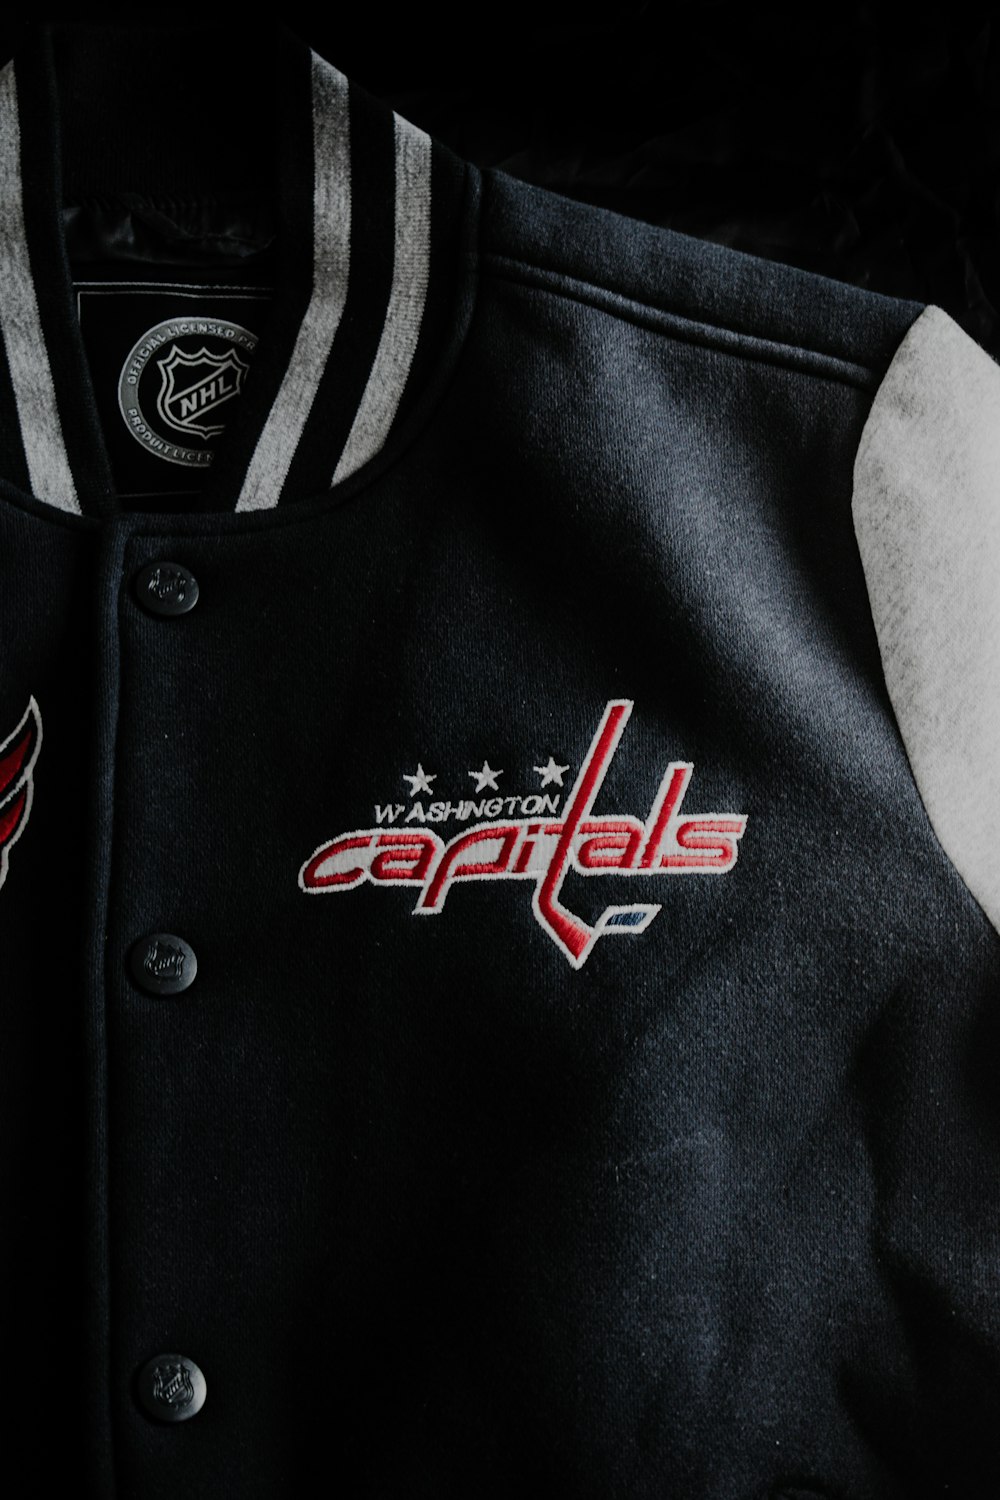 a black jacket with a red and white logo on it